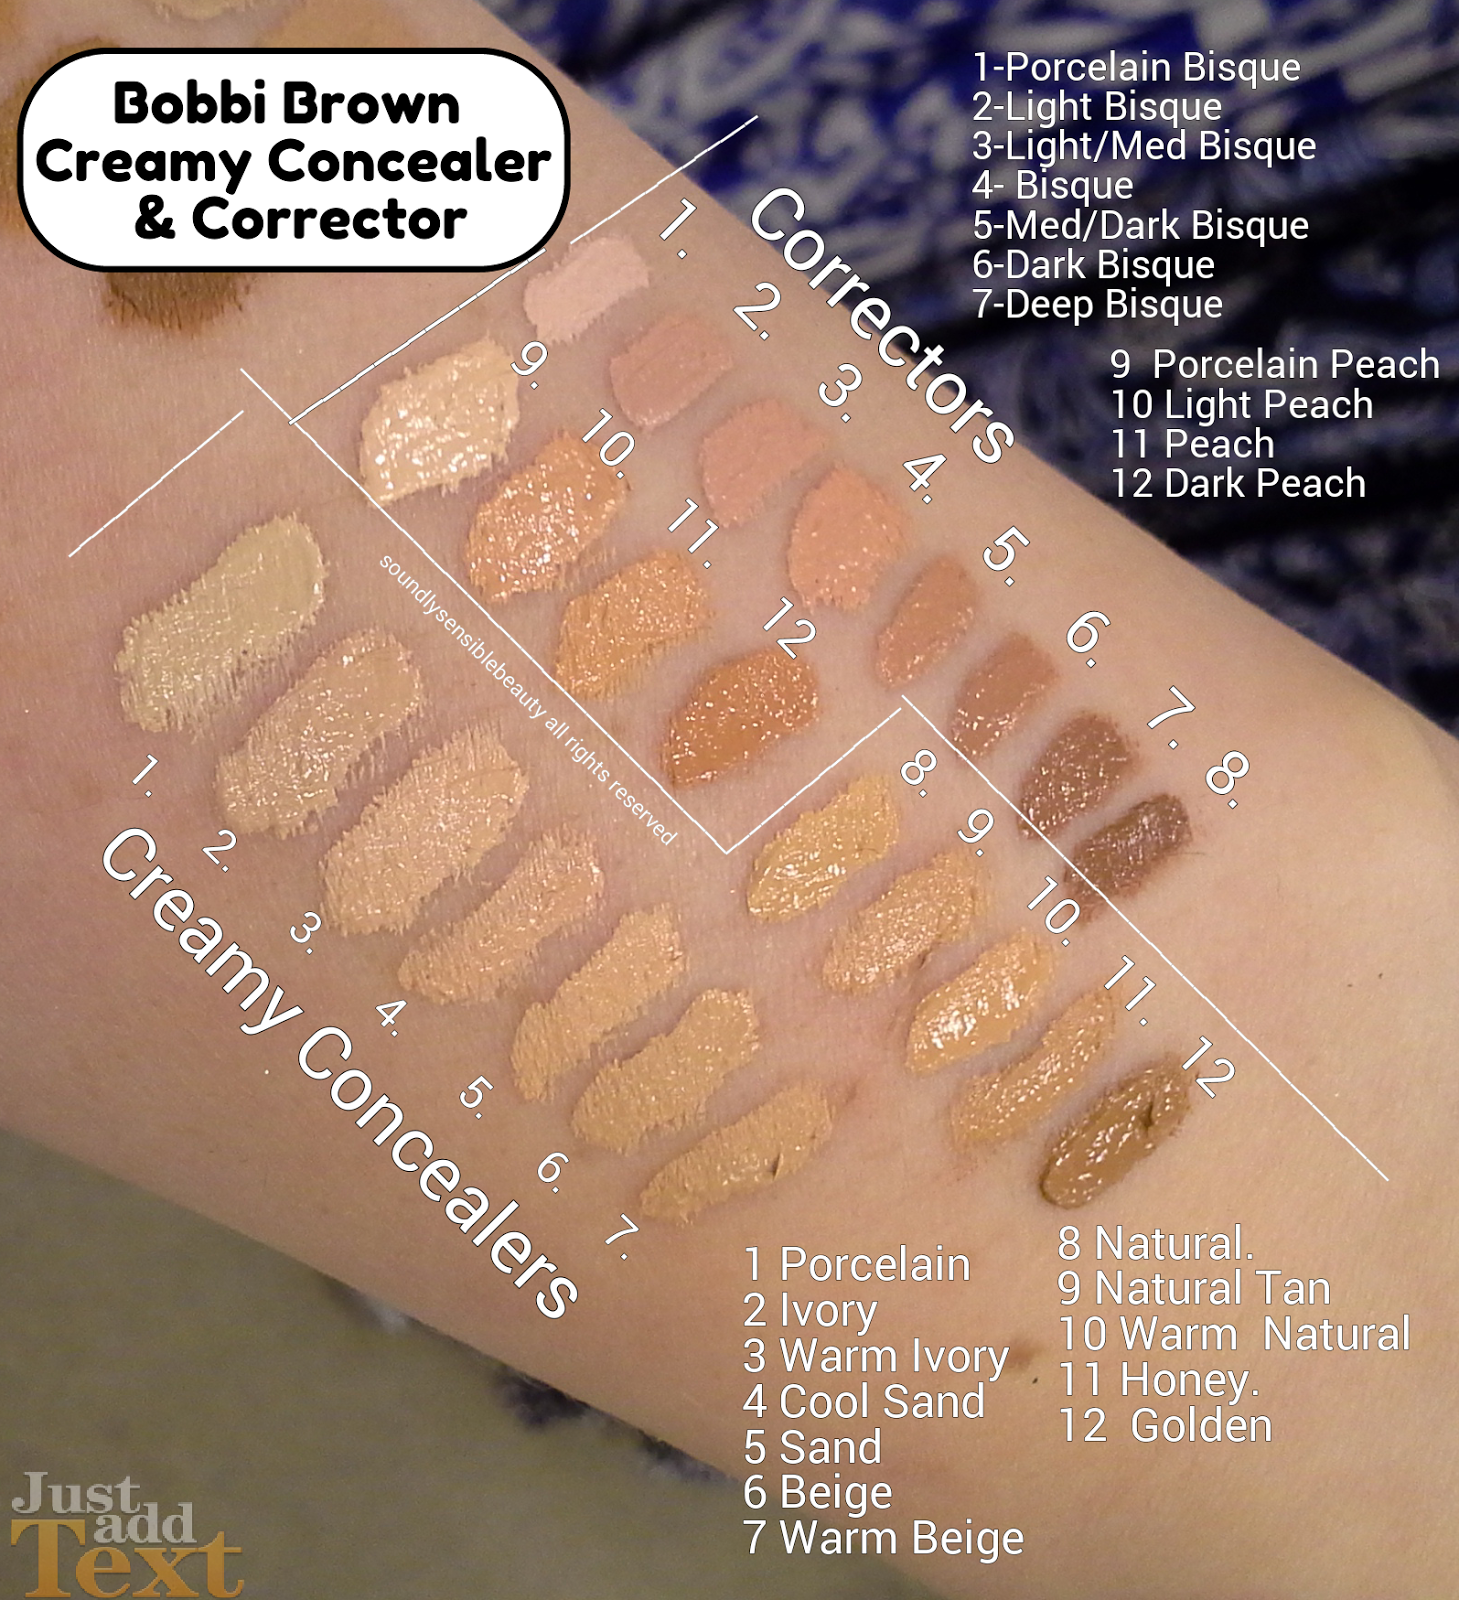 Bobbi Brown Creamy Concealer & Corrector; Swatches of Shades & Review